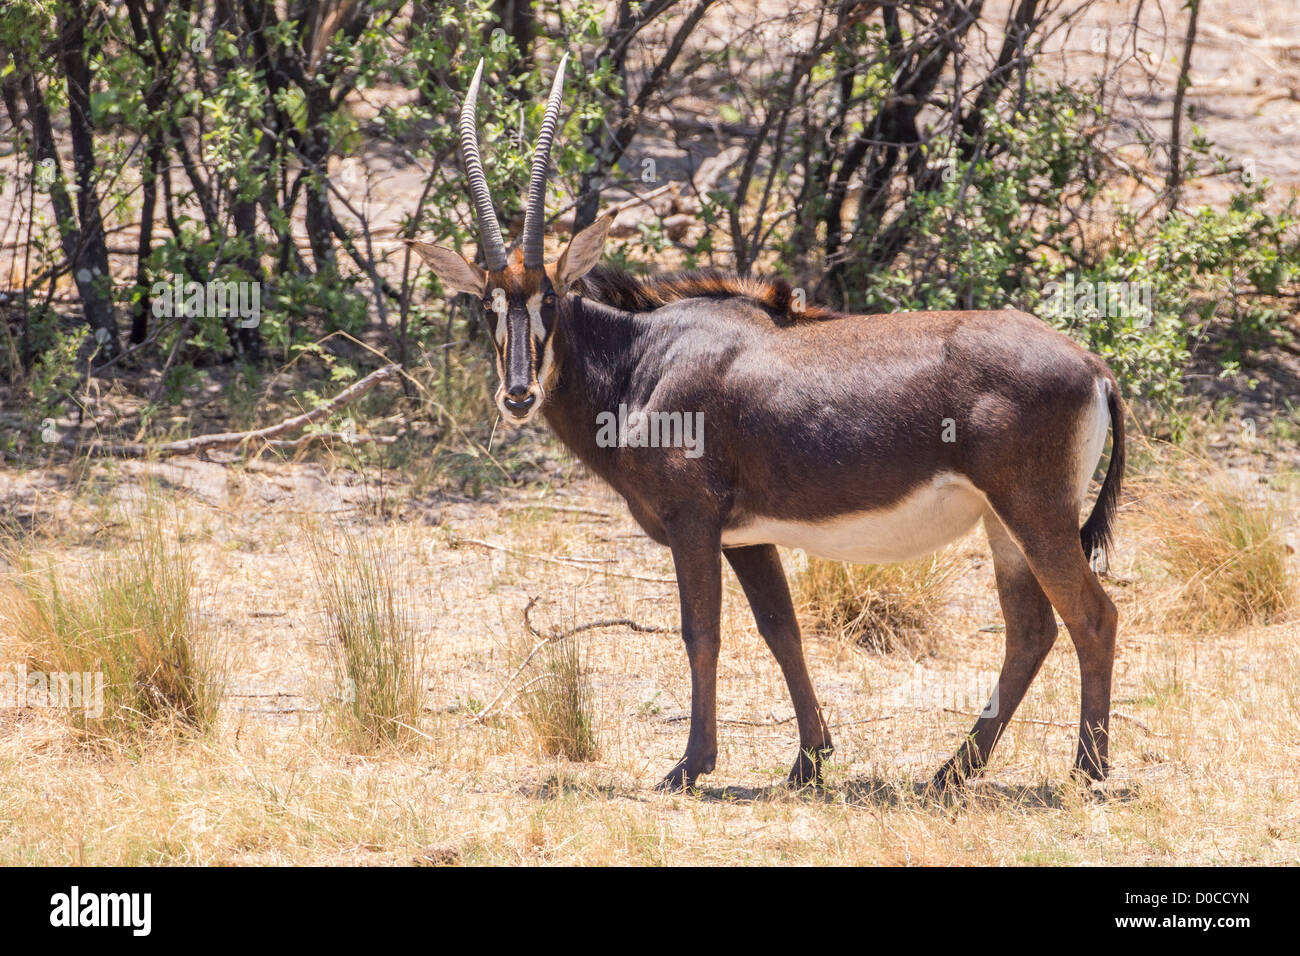 Sable antelope (Hippotragus niger) in the Babwata National Park, Namibia. Stock Photo